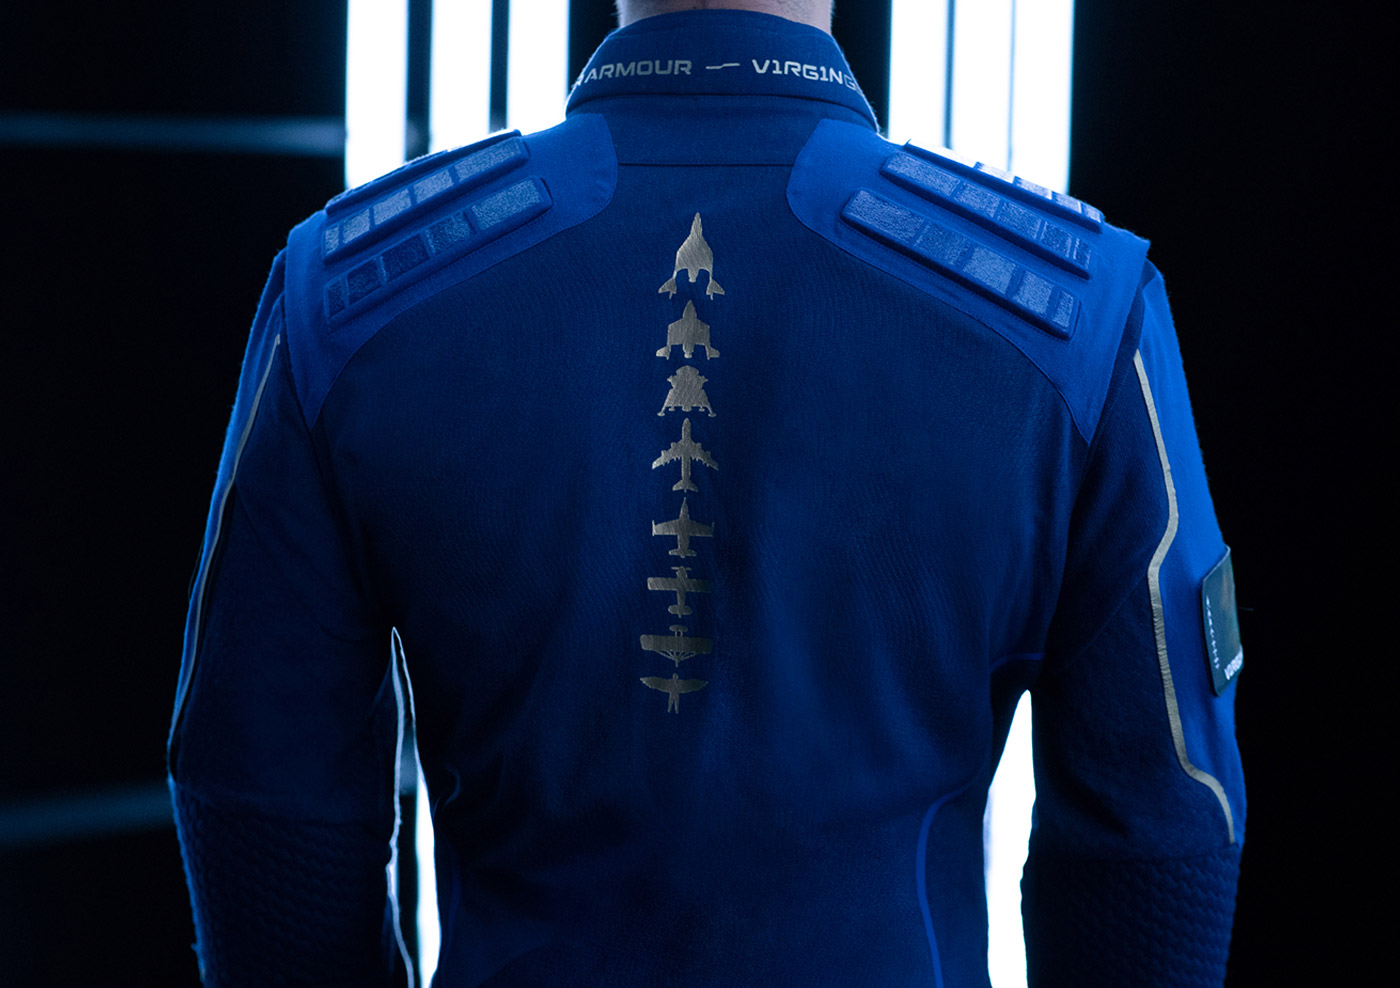 Under Armour creates the world's first spacesuit for the masses